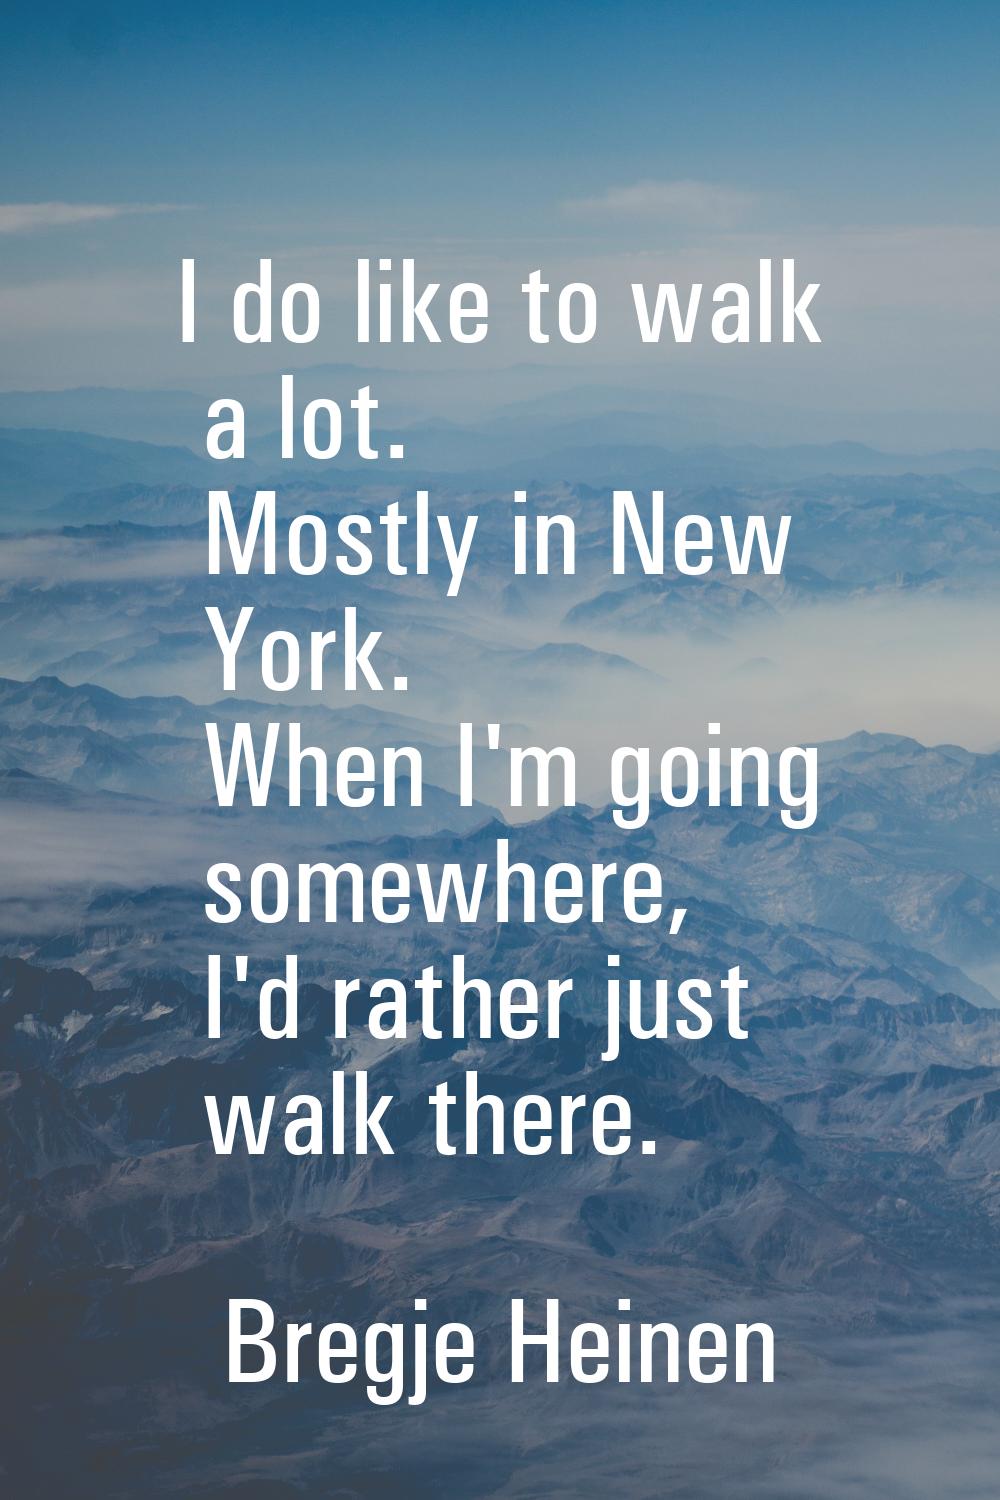 I do like to walk a lot. Mostly in New York. When I'm going somewhere, I'd rather just walk there.